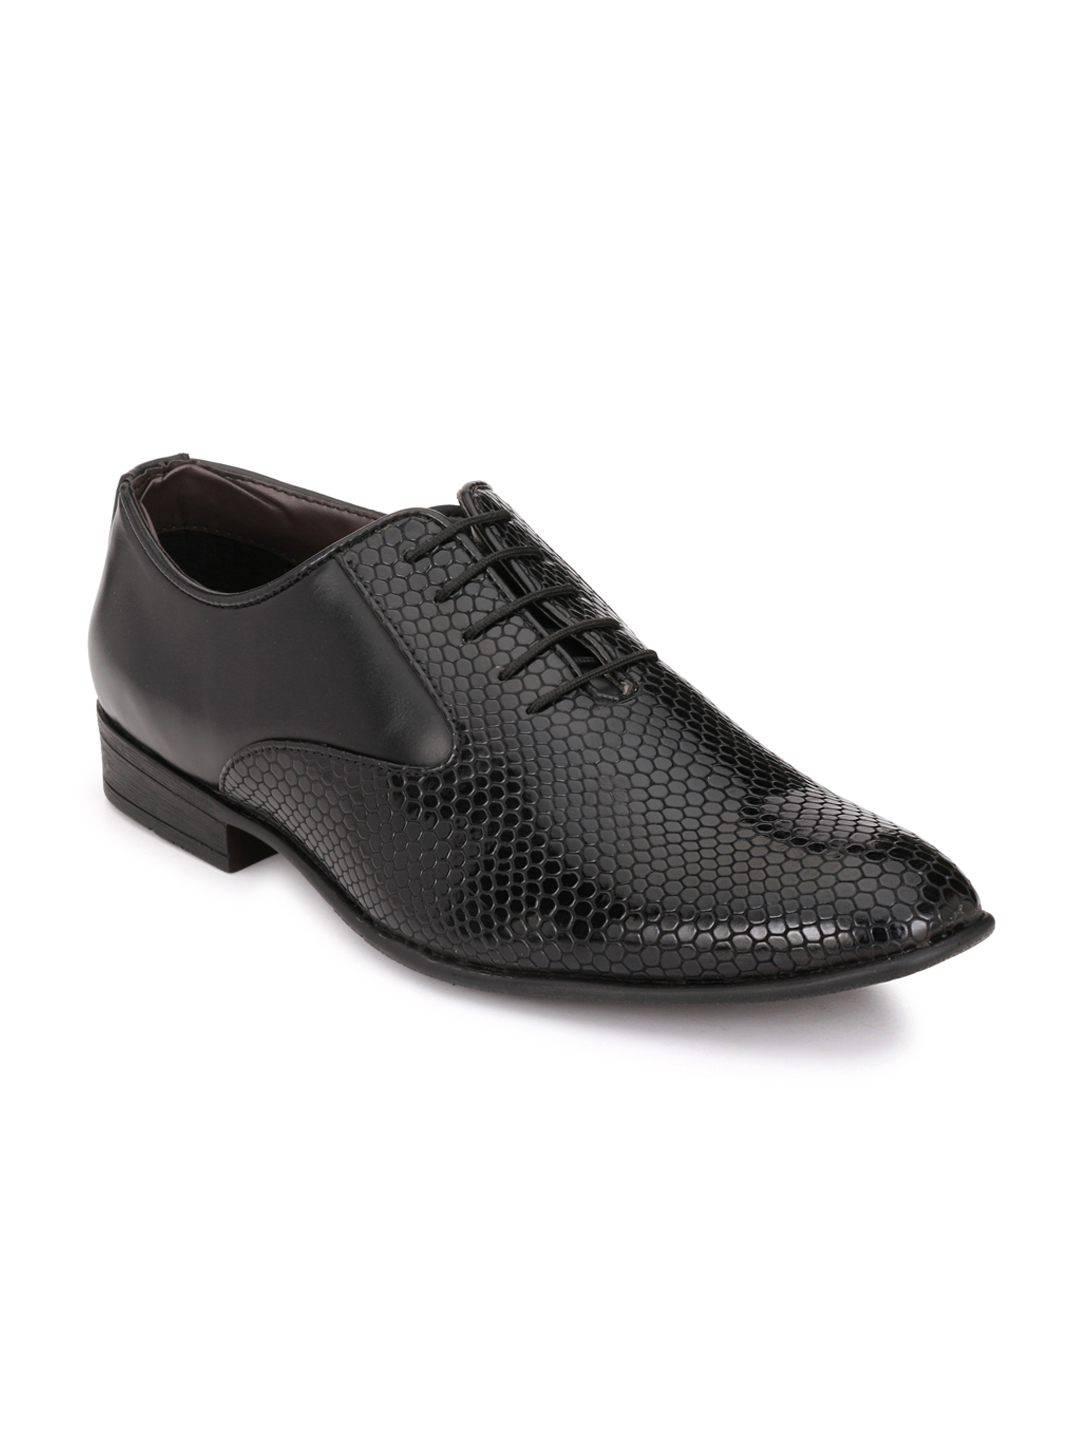 Buy Afrojack Men Black Lace-up Formal Shoes Online @ ₹2499 from ShopClues